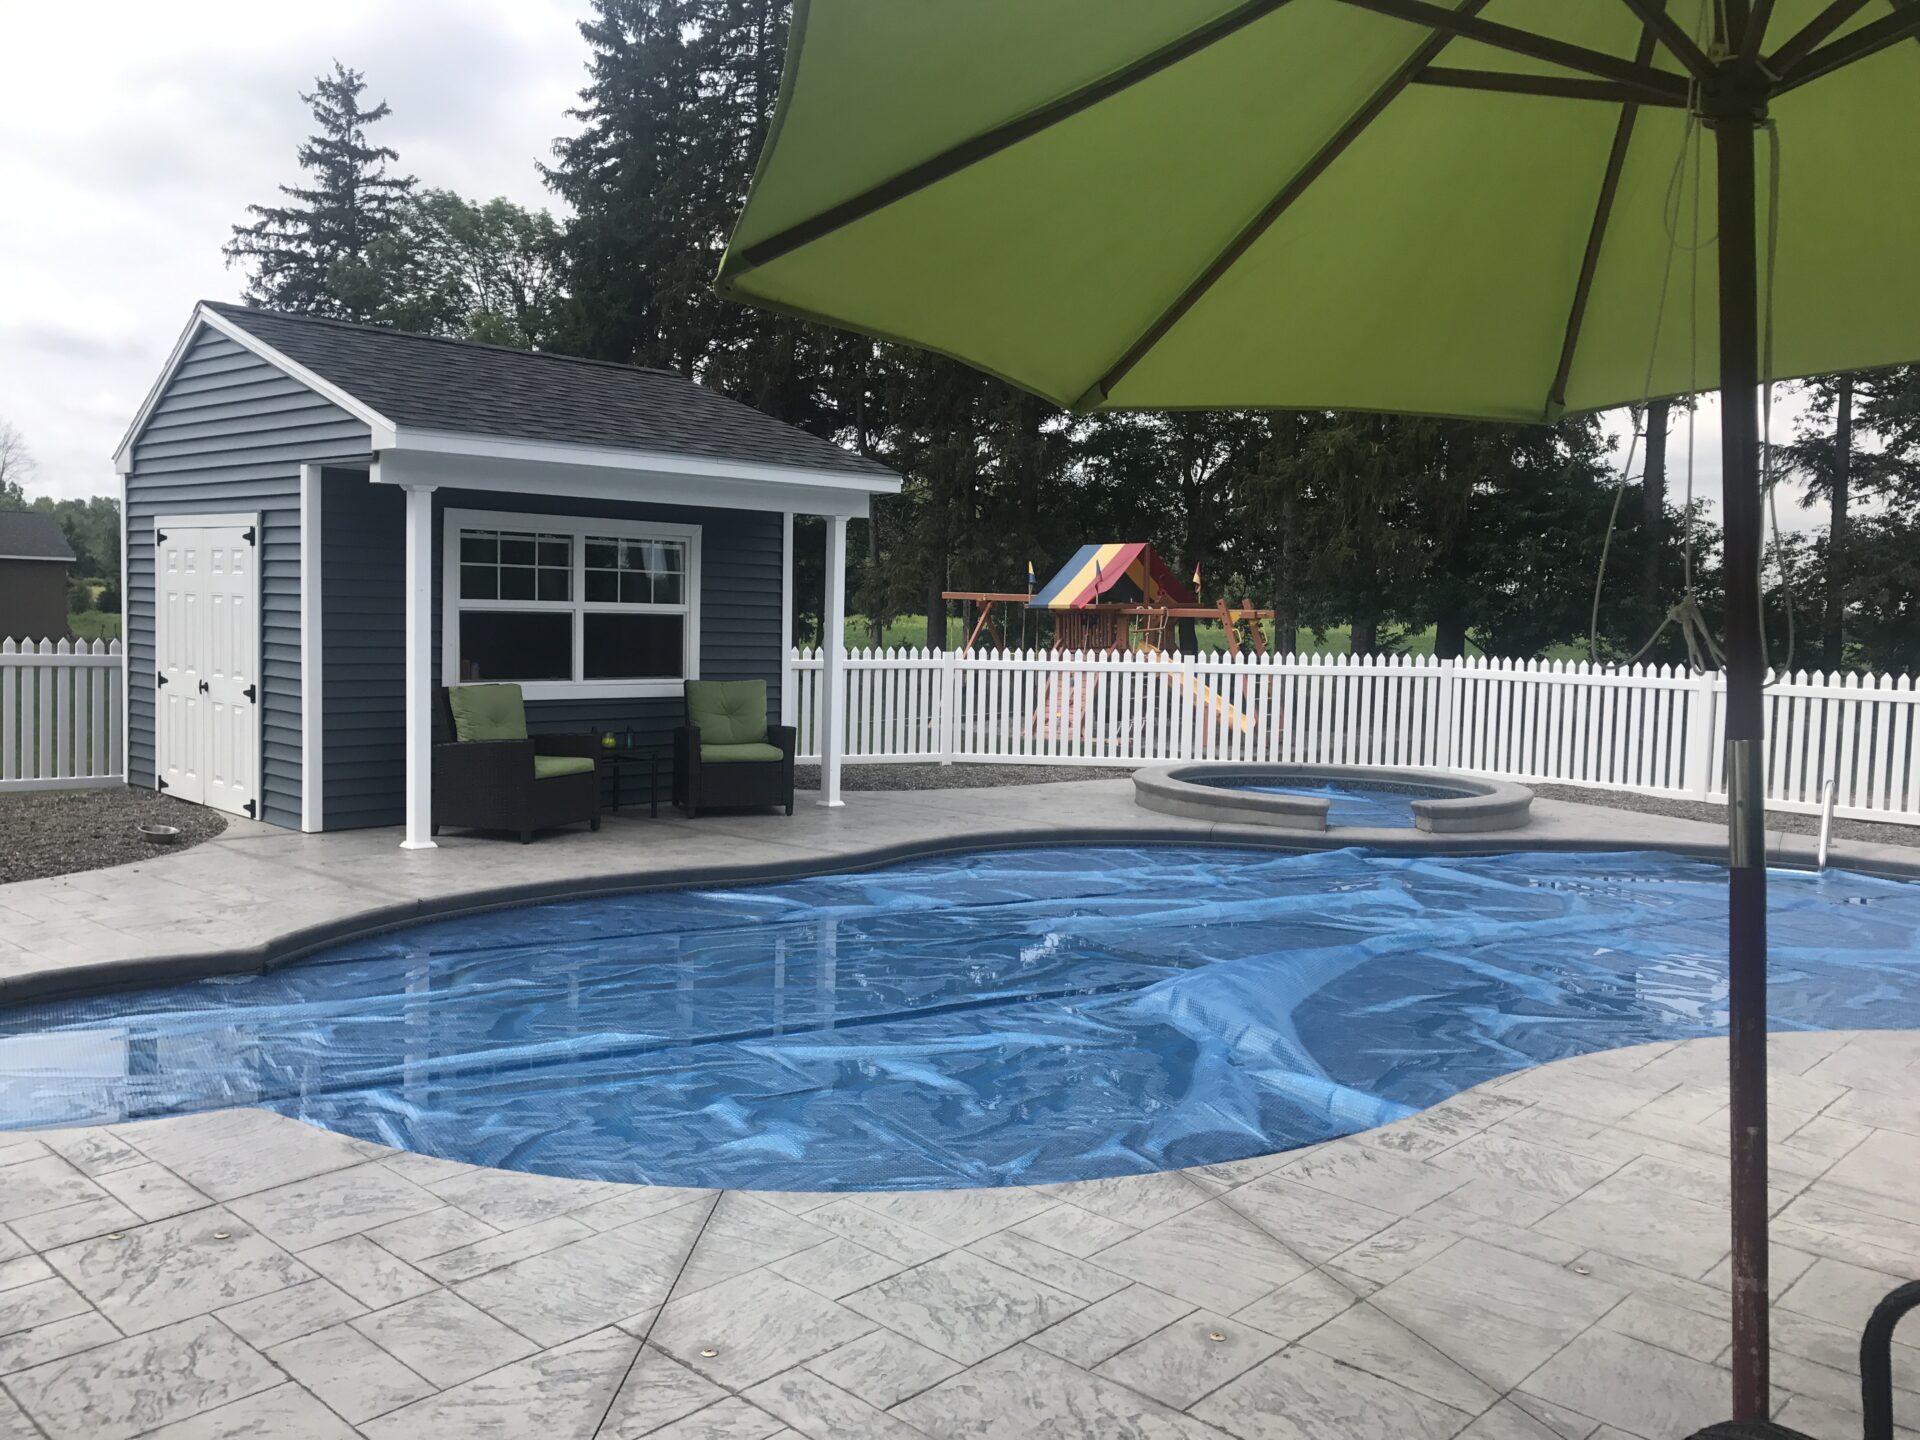 A pool with an umbrella in the middle of it